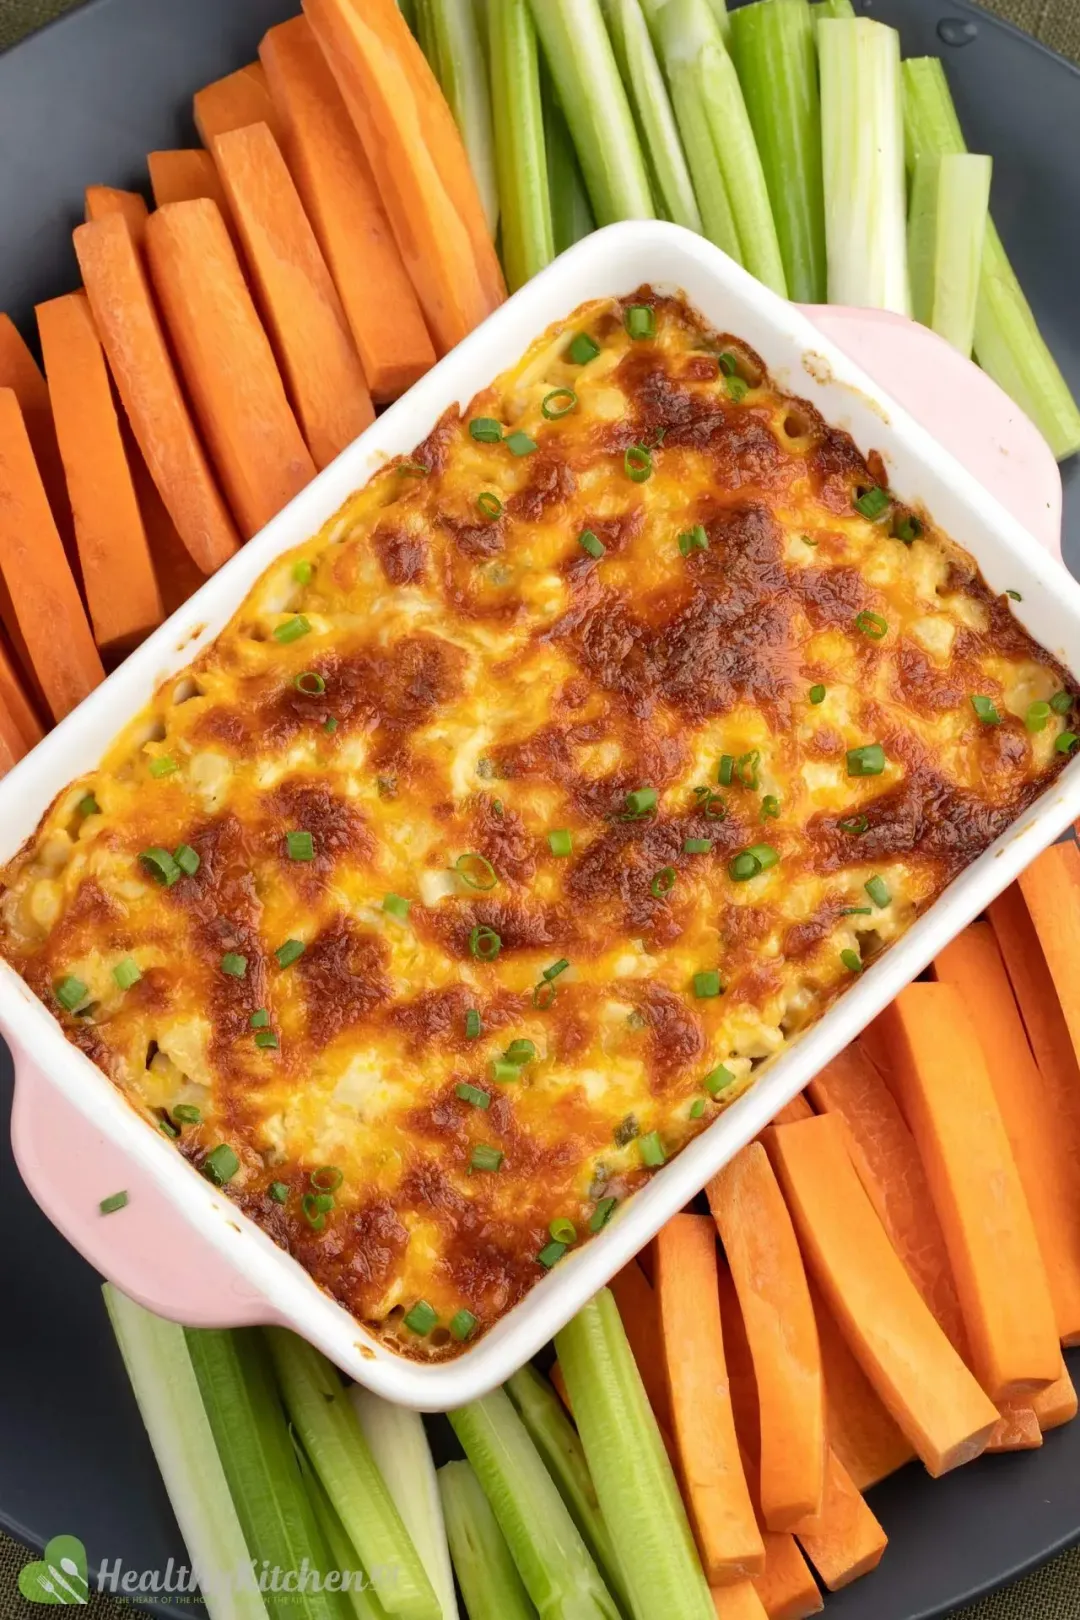 A ceramic baking pan filled with Buffalo Chicken Dip placed on a bed of celery sticks and carrot sticks